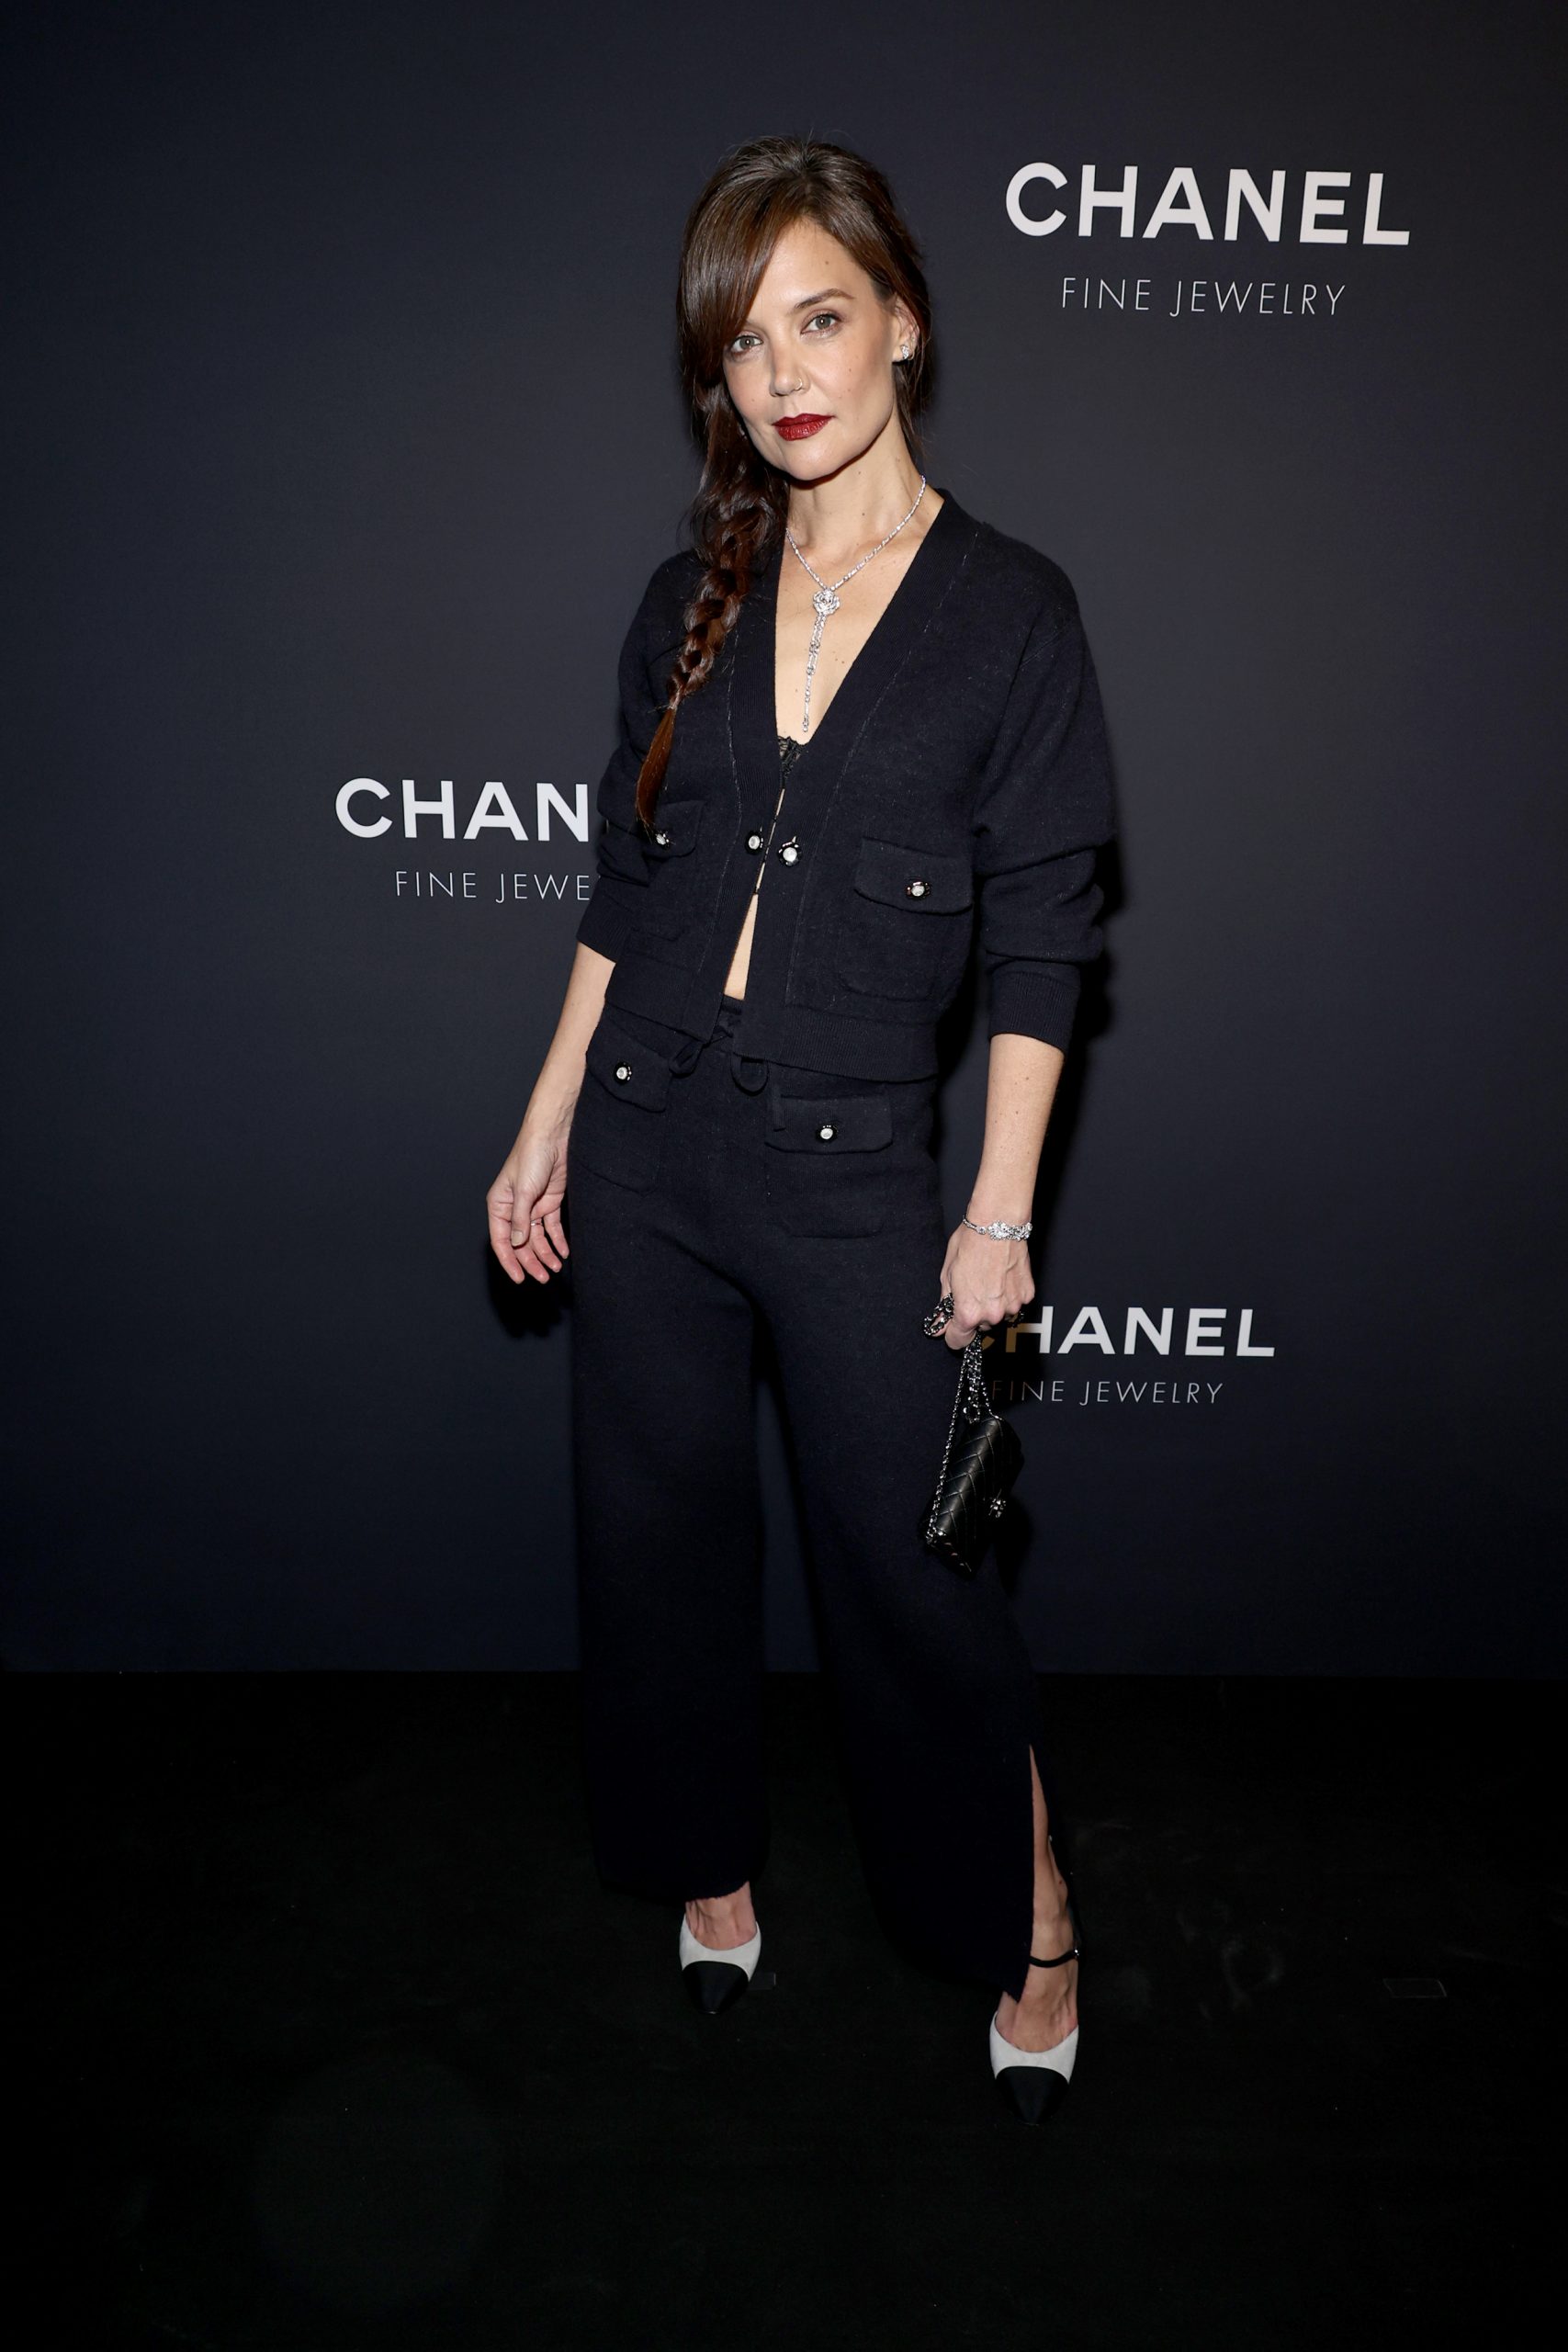 NEW YORK, NEW YORK - FEBRUARY 07: Katie Holmes, wearing CHANEL, attends the CHANEL Dinner to celebrate the Watches & Fine Jewelry Fifth Avenue Flagship Boutique Opening on February 07, 2024 in New York City. (Photo by Jamie McCarthy/WireImage)